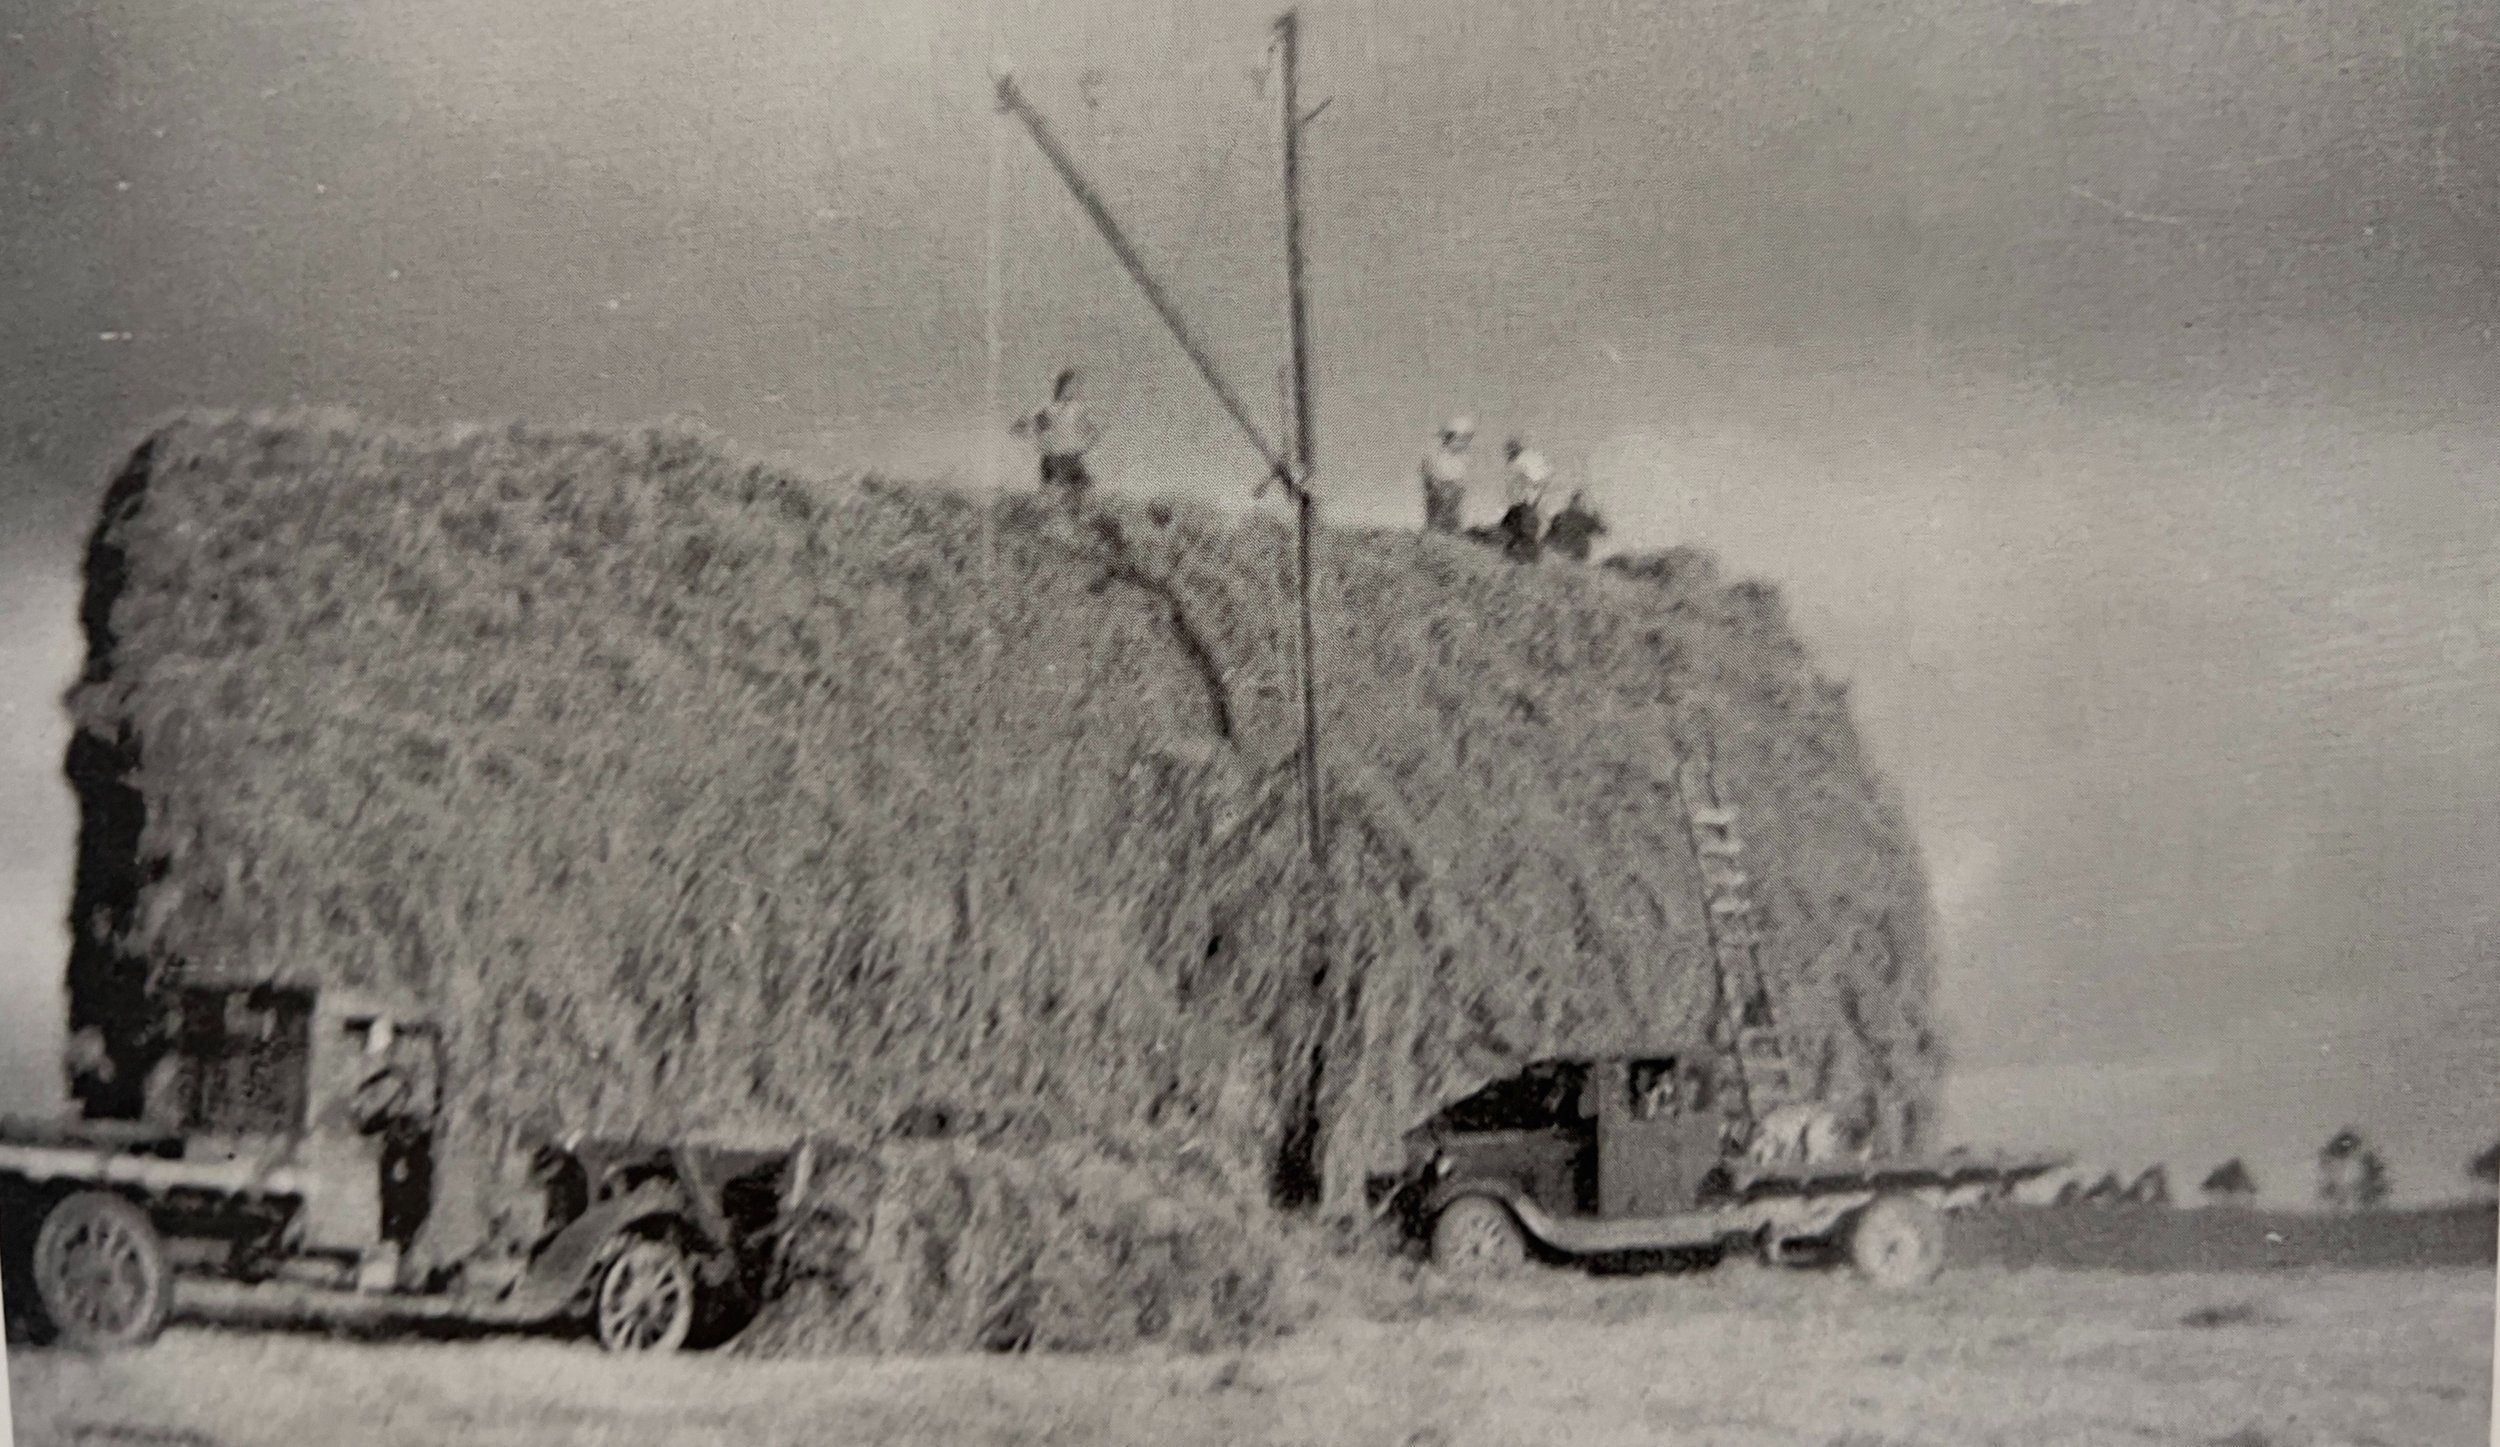 Building a hay stack in 1930s